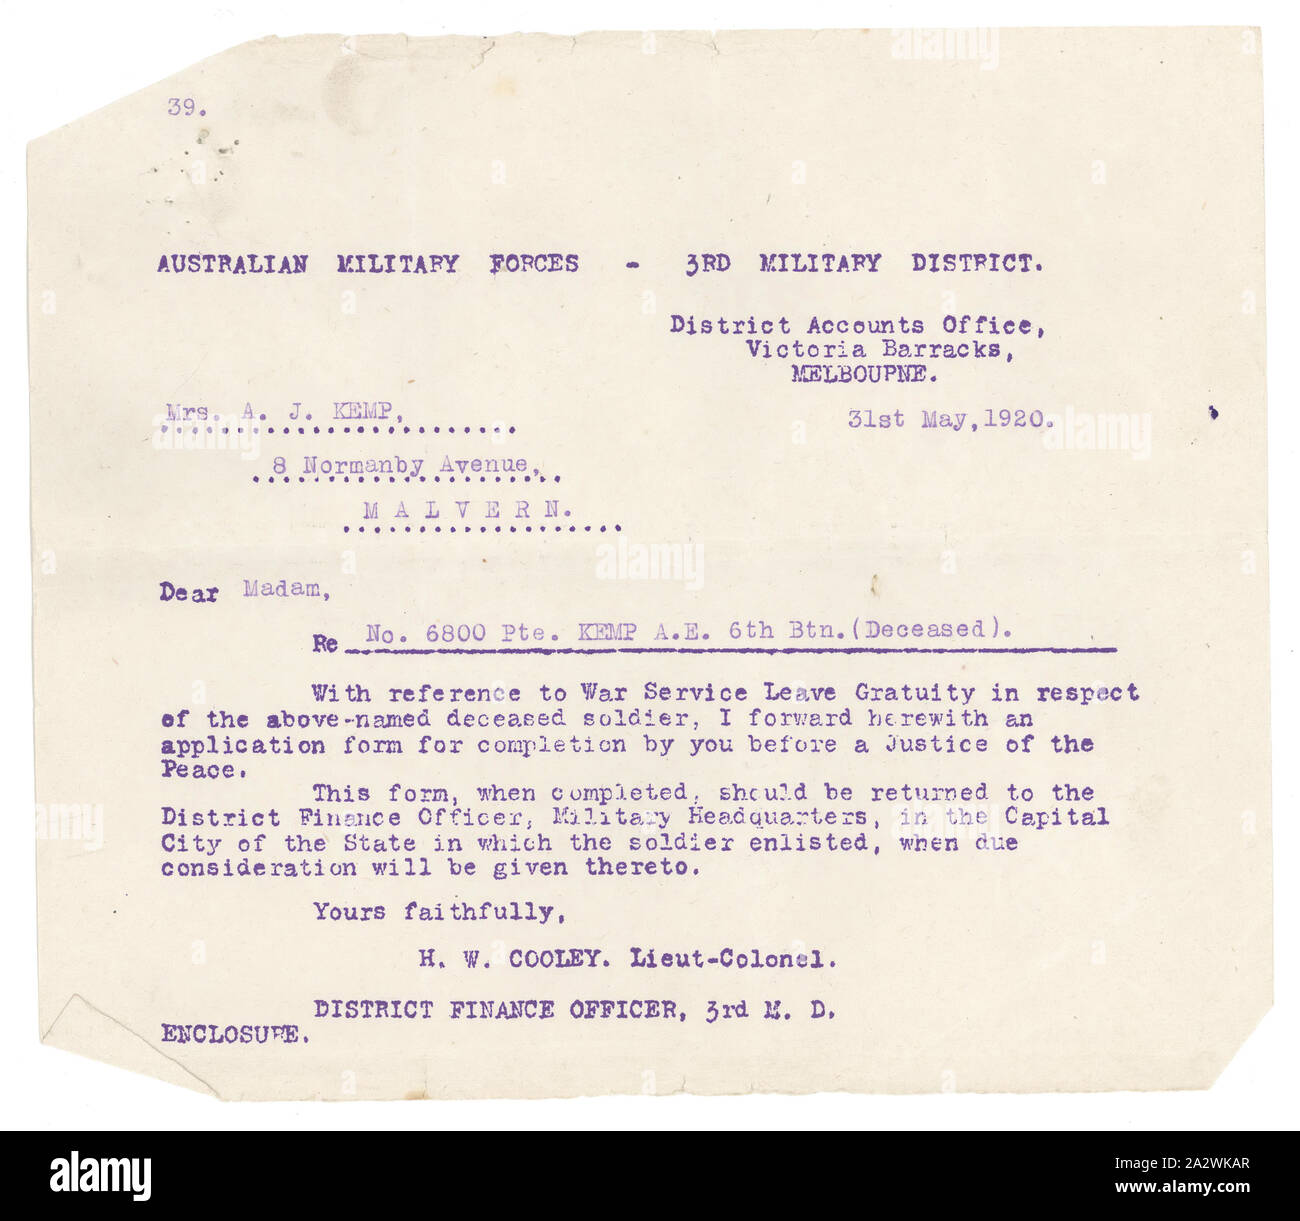 Letter - Australian Military Forces to Mrs A. J. Kemp, War Service Leave Gratuity, 31 May 1920, Letter from the District Accounts Office of the Australian Military Forces 3rd Military District to Mrs Annie Josephine Kemp, widow of World War I soldier Private Albert Edward Kemp, who was killed in action in 1917. The letter explains that an application form is enclosed for completion by Annie before a Justice of the Peace and is to be returned to the District Finance Officer, Military Stock Photo